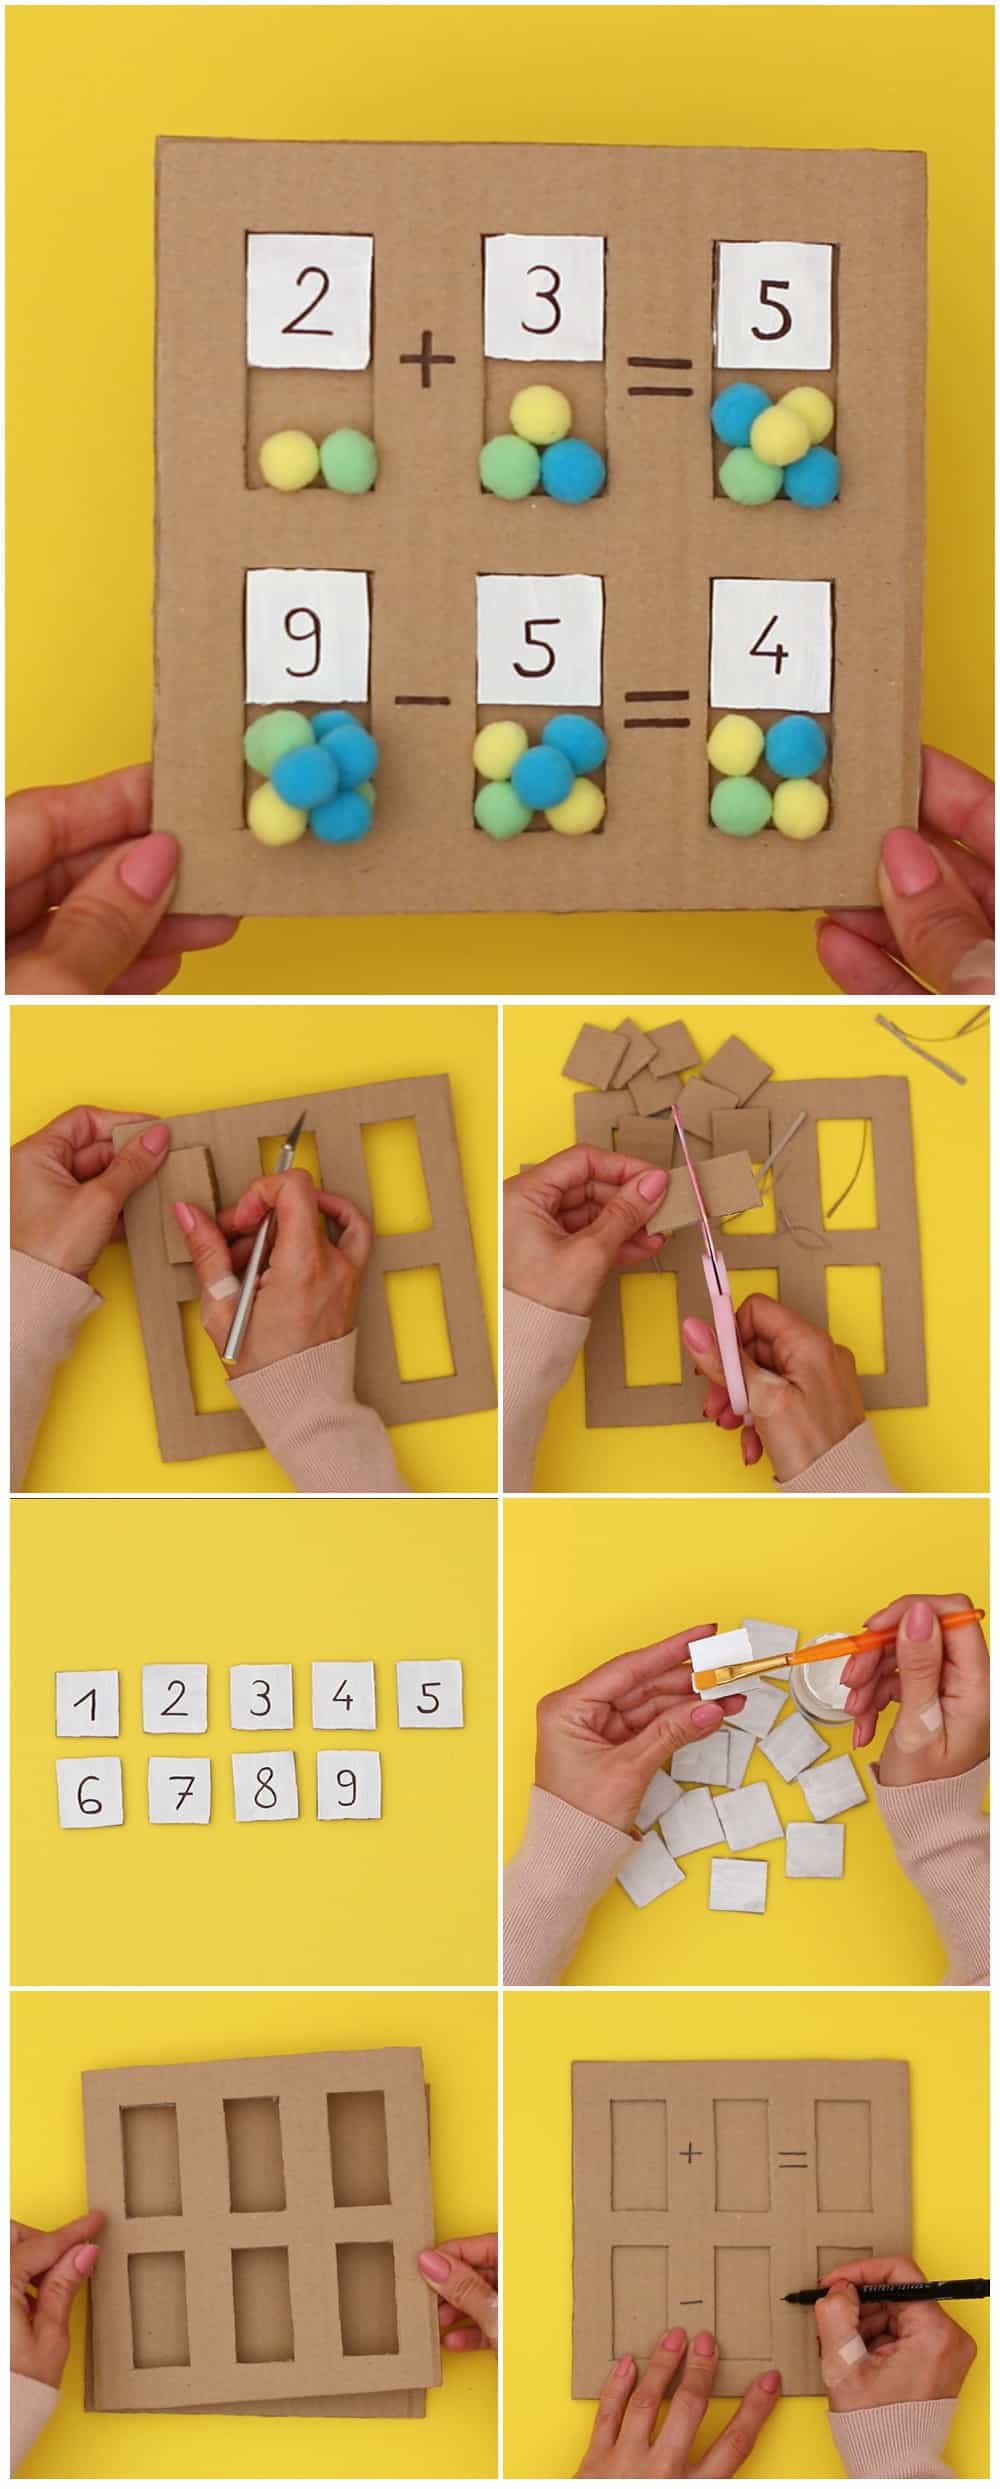 cardboard math puzzle with pom poms for early kids math learning 